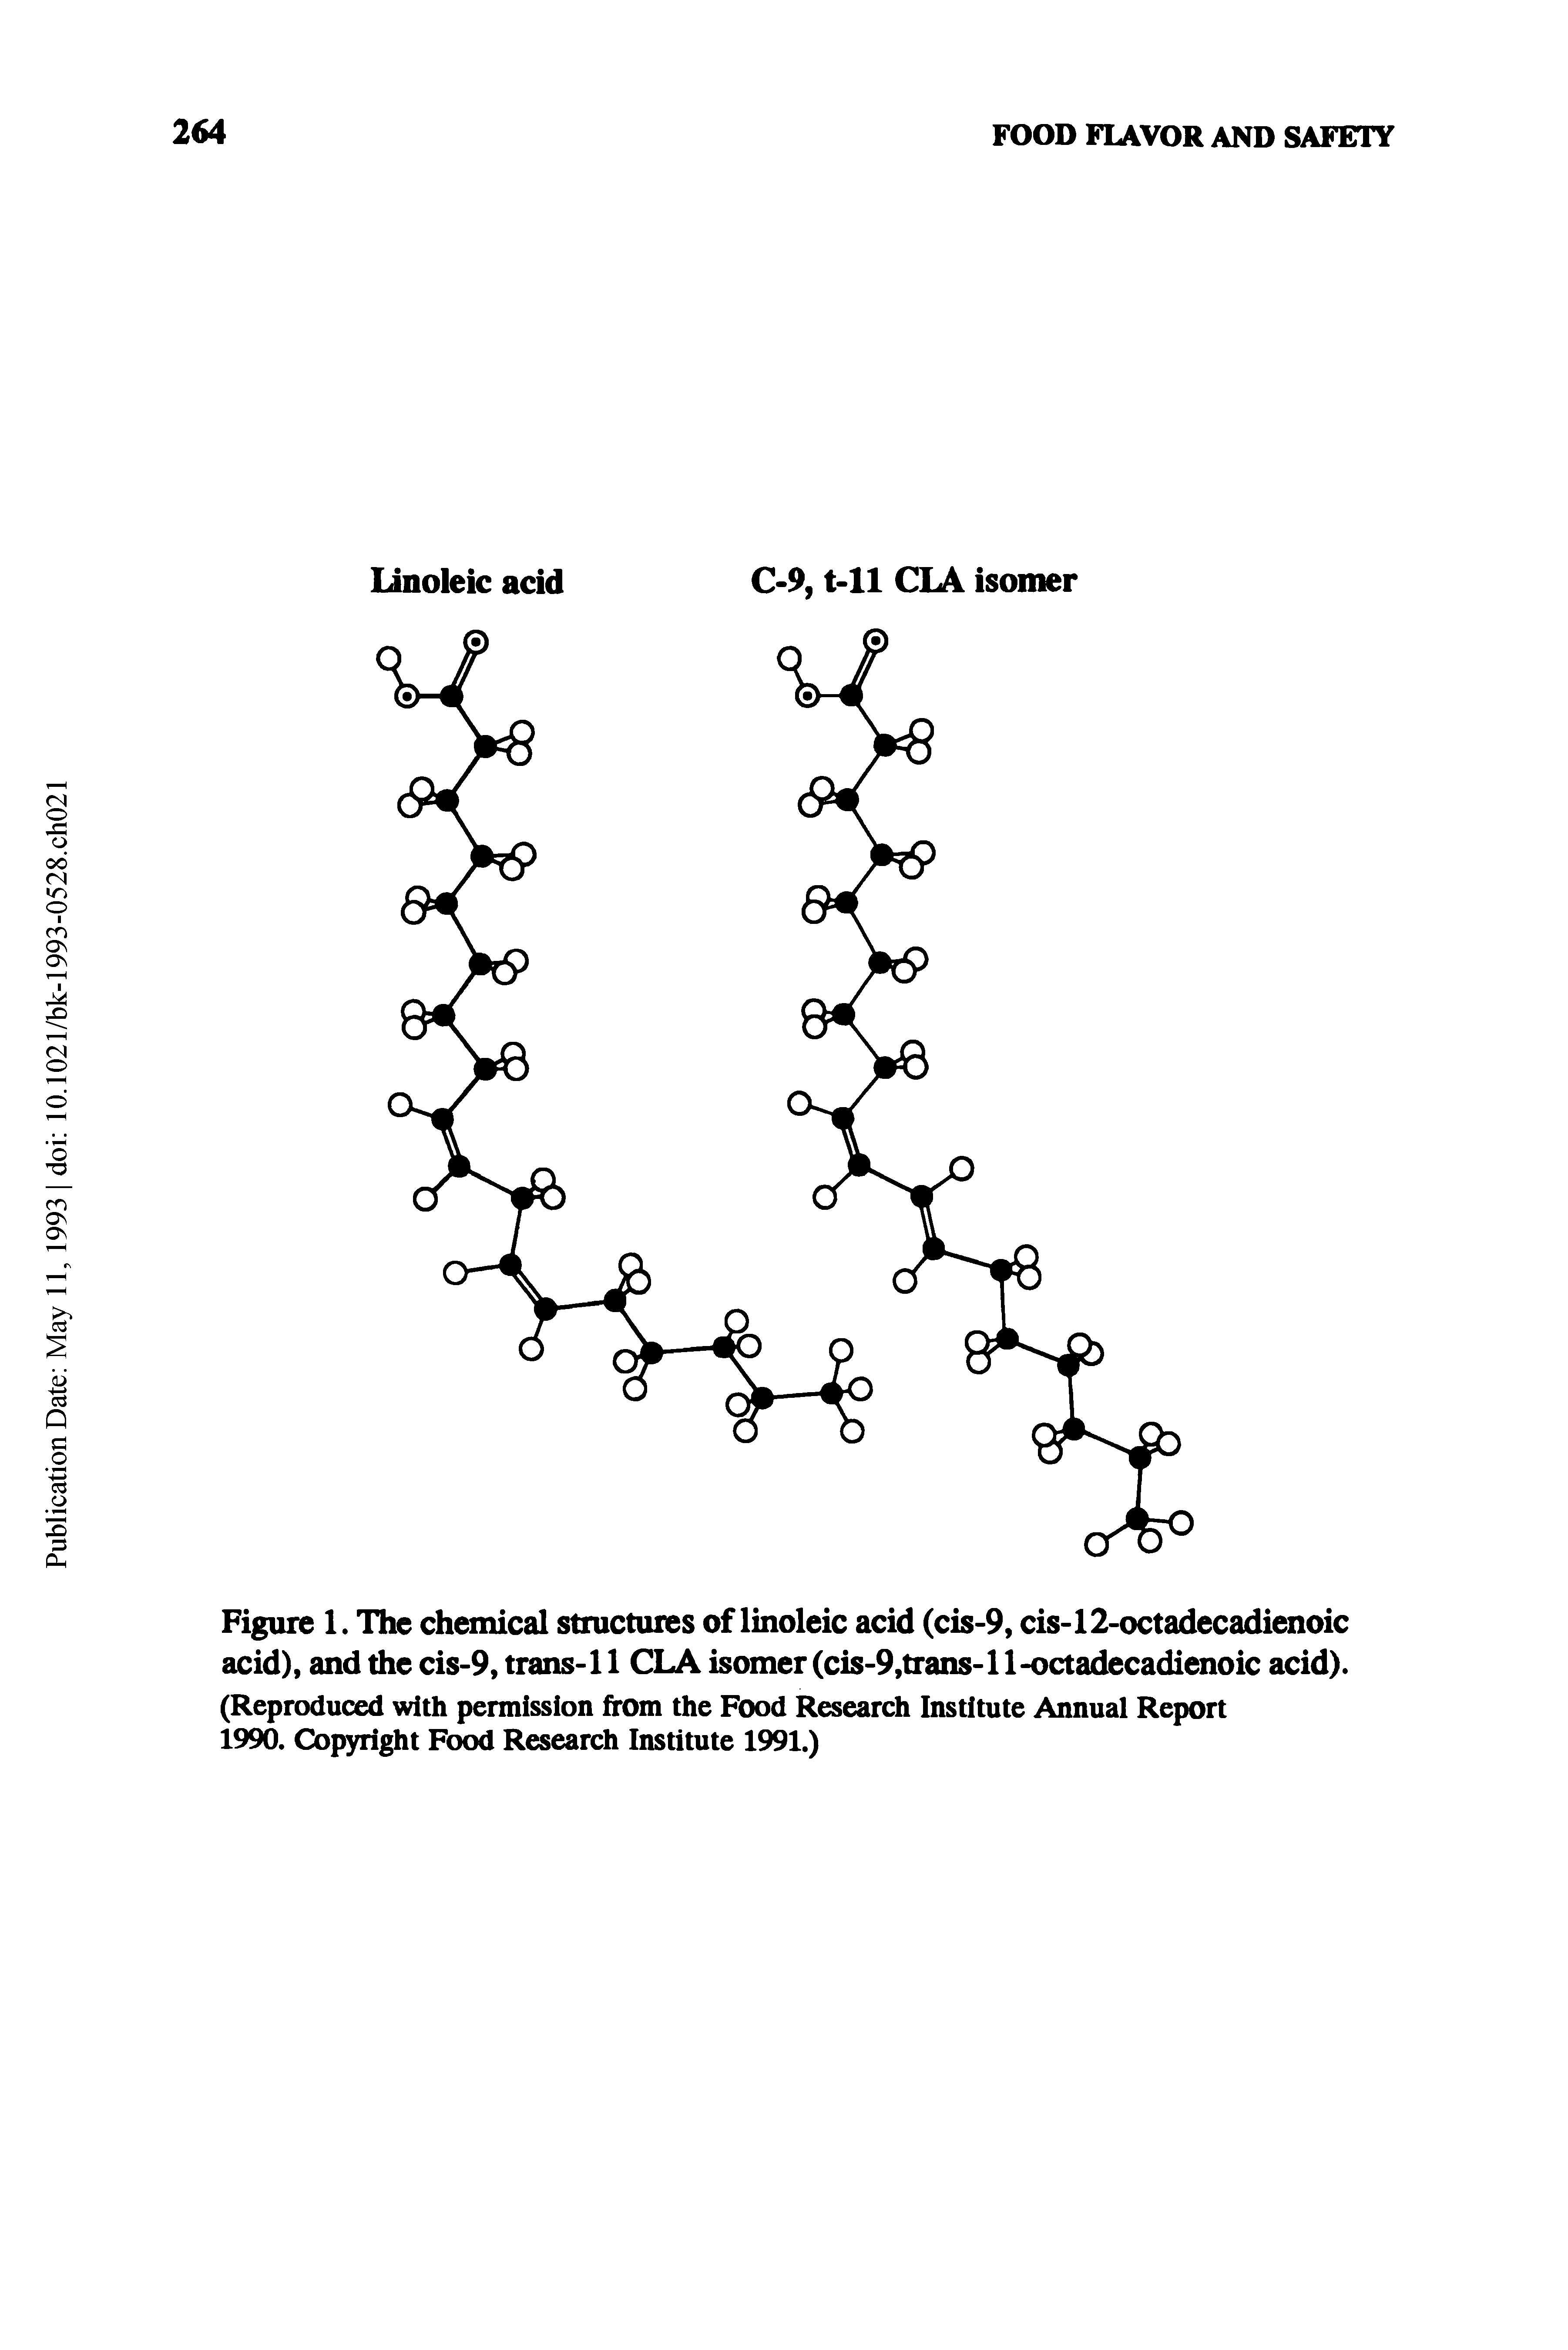 Figure 1. The chemical structures of linoleic acid (cis-9, cis-12-octadecadienoic acid), and the cis-9, trans-11 CLA isomer (cis-9,trans-l 1-octadecadienoic acid). (Reproduced with permission from the Food Research Institute Annual Report 1990. Copyright Food Research Institute 1991.)...